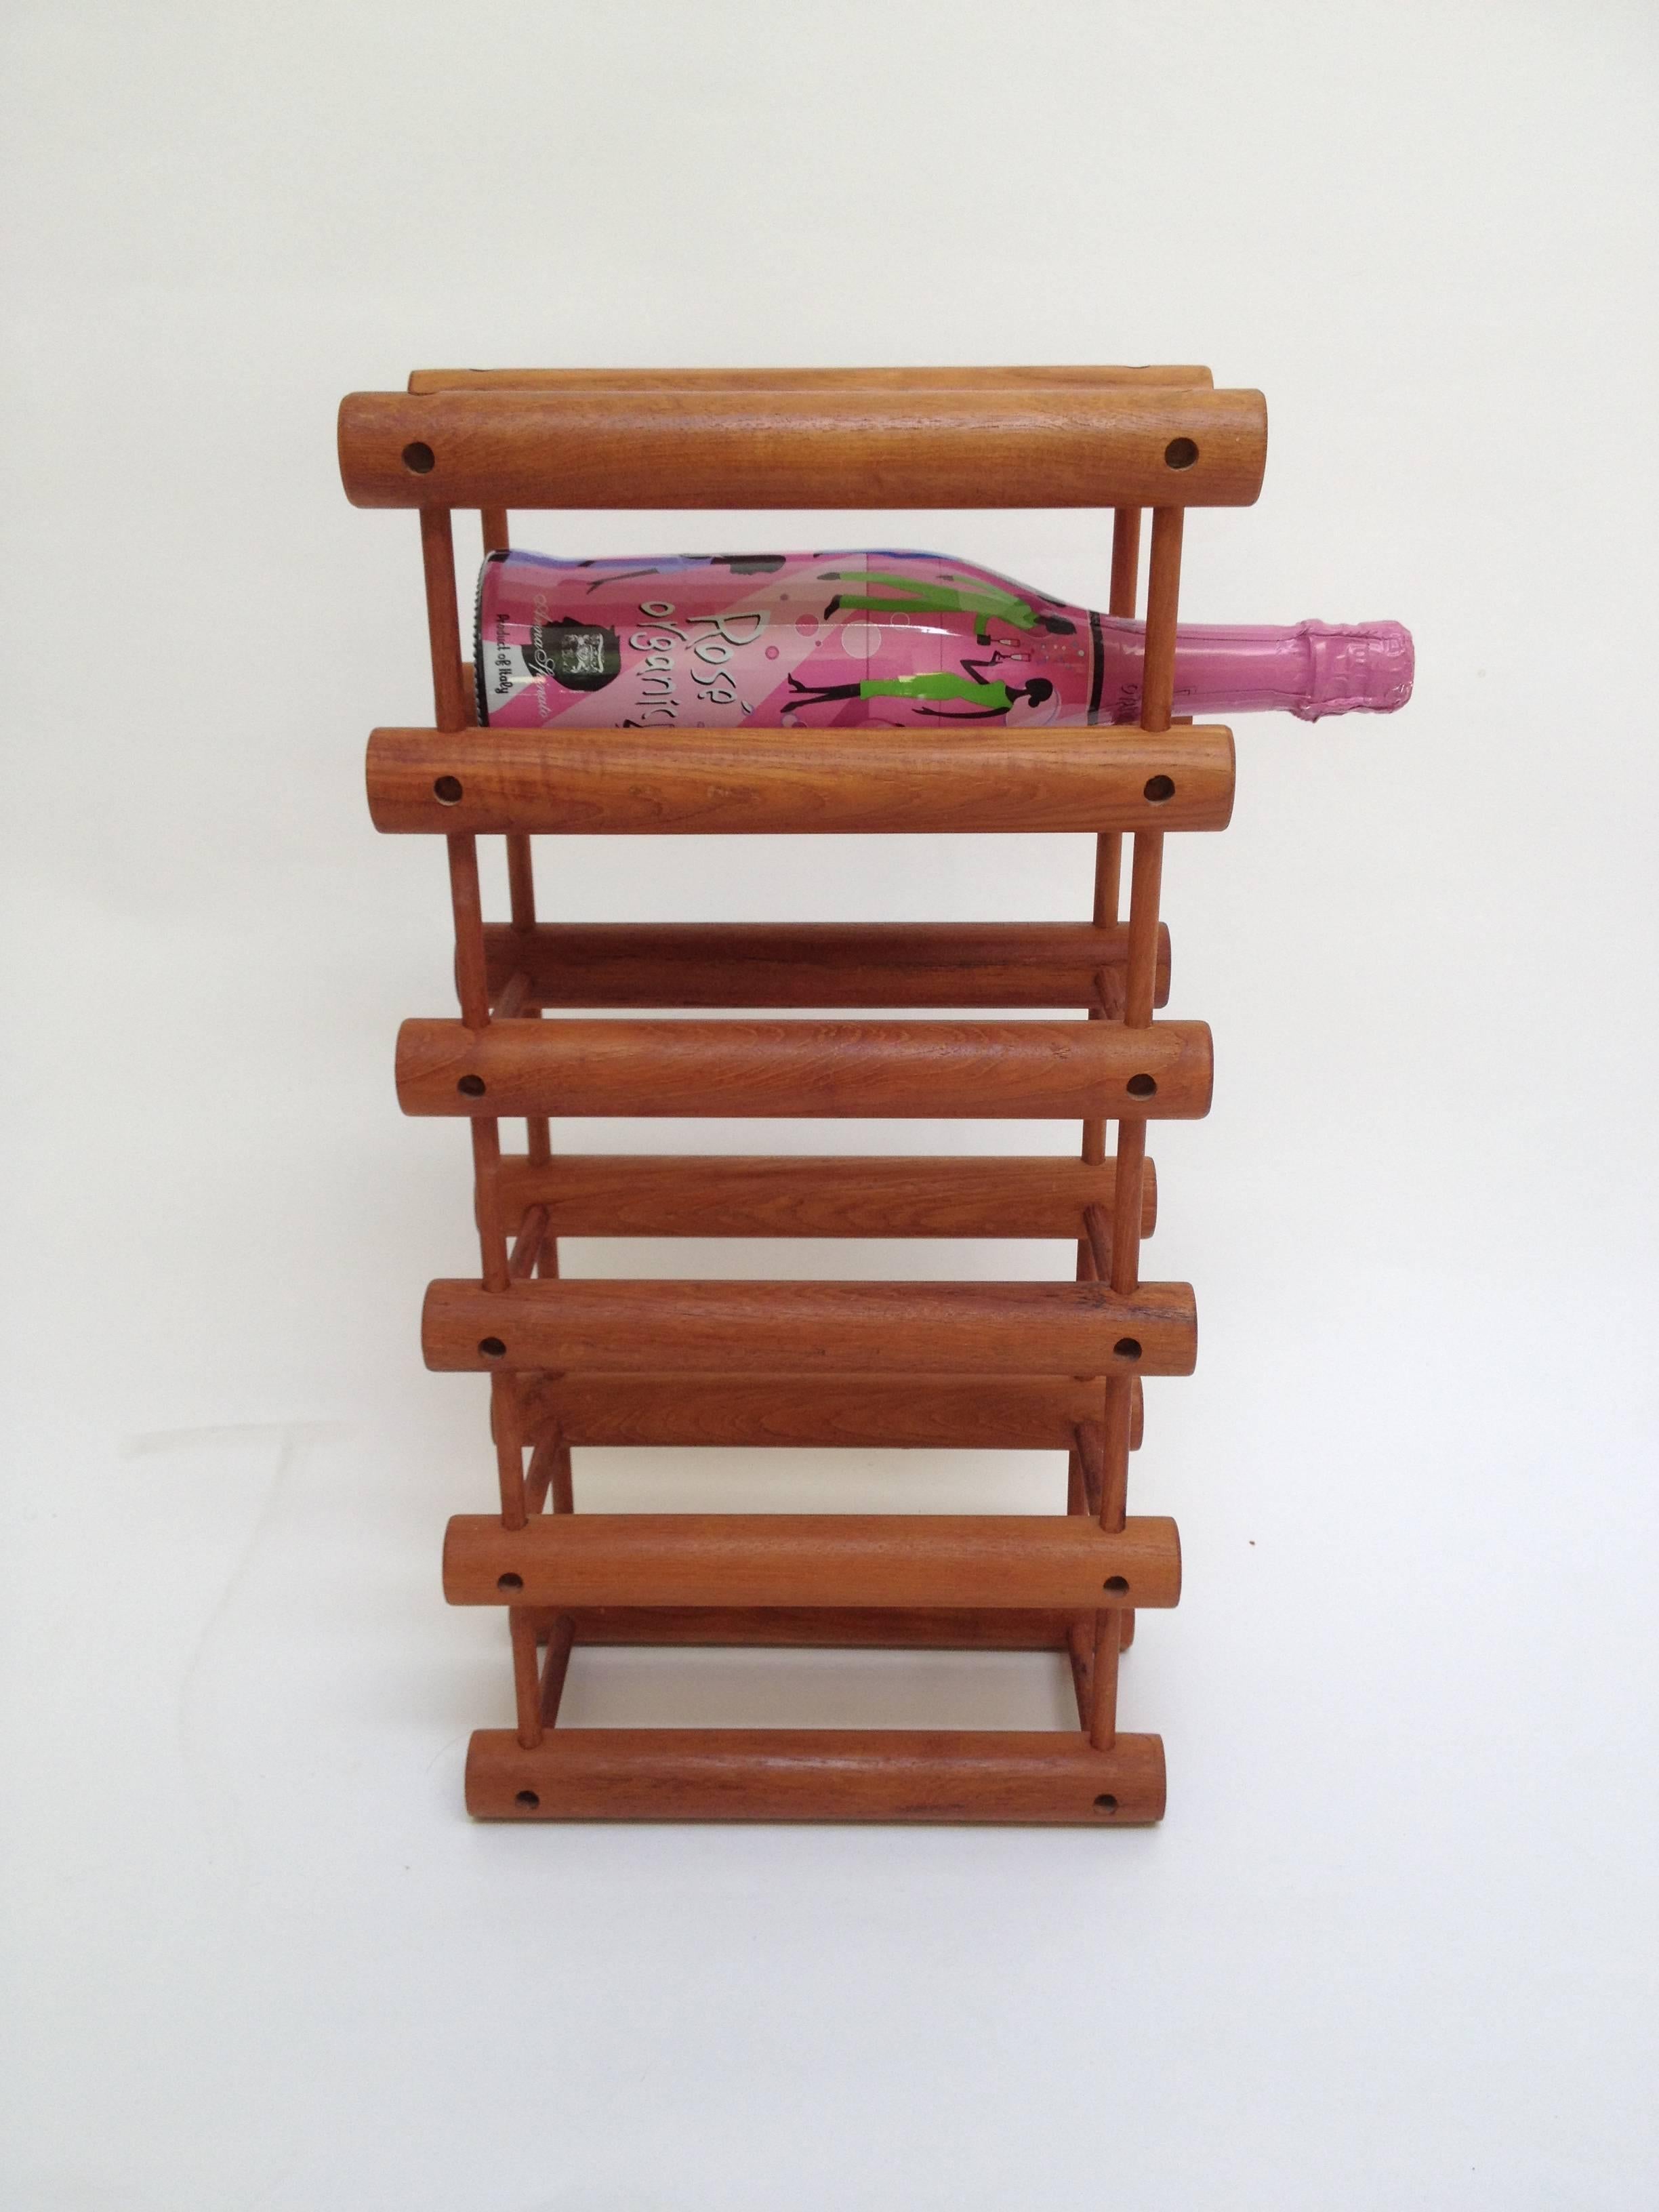 Fabulous modular Mid-Century Modern teak wine rack, designed by Richard Nissen, made in Denmark, use horizontally or vertically, when it is vertical you can get six bottles and if you have the space to use horizontally you can get ten bottles.